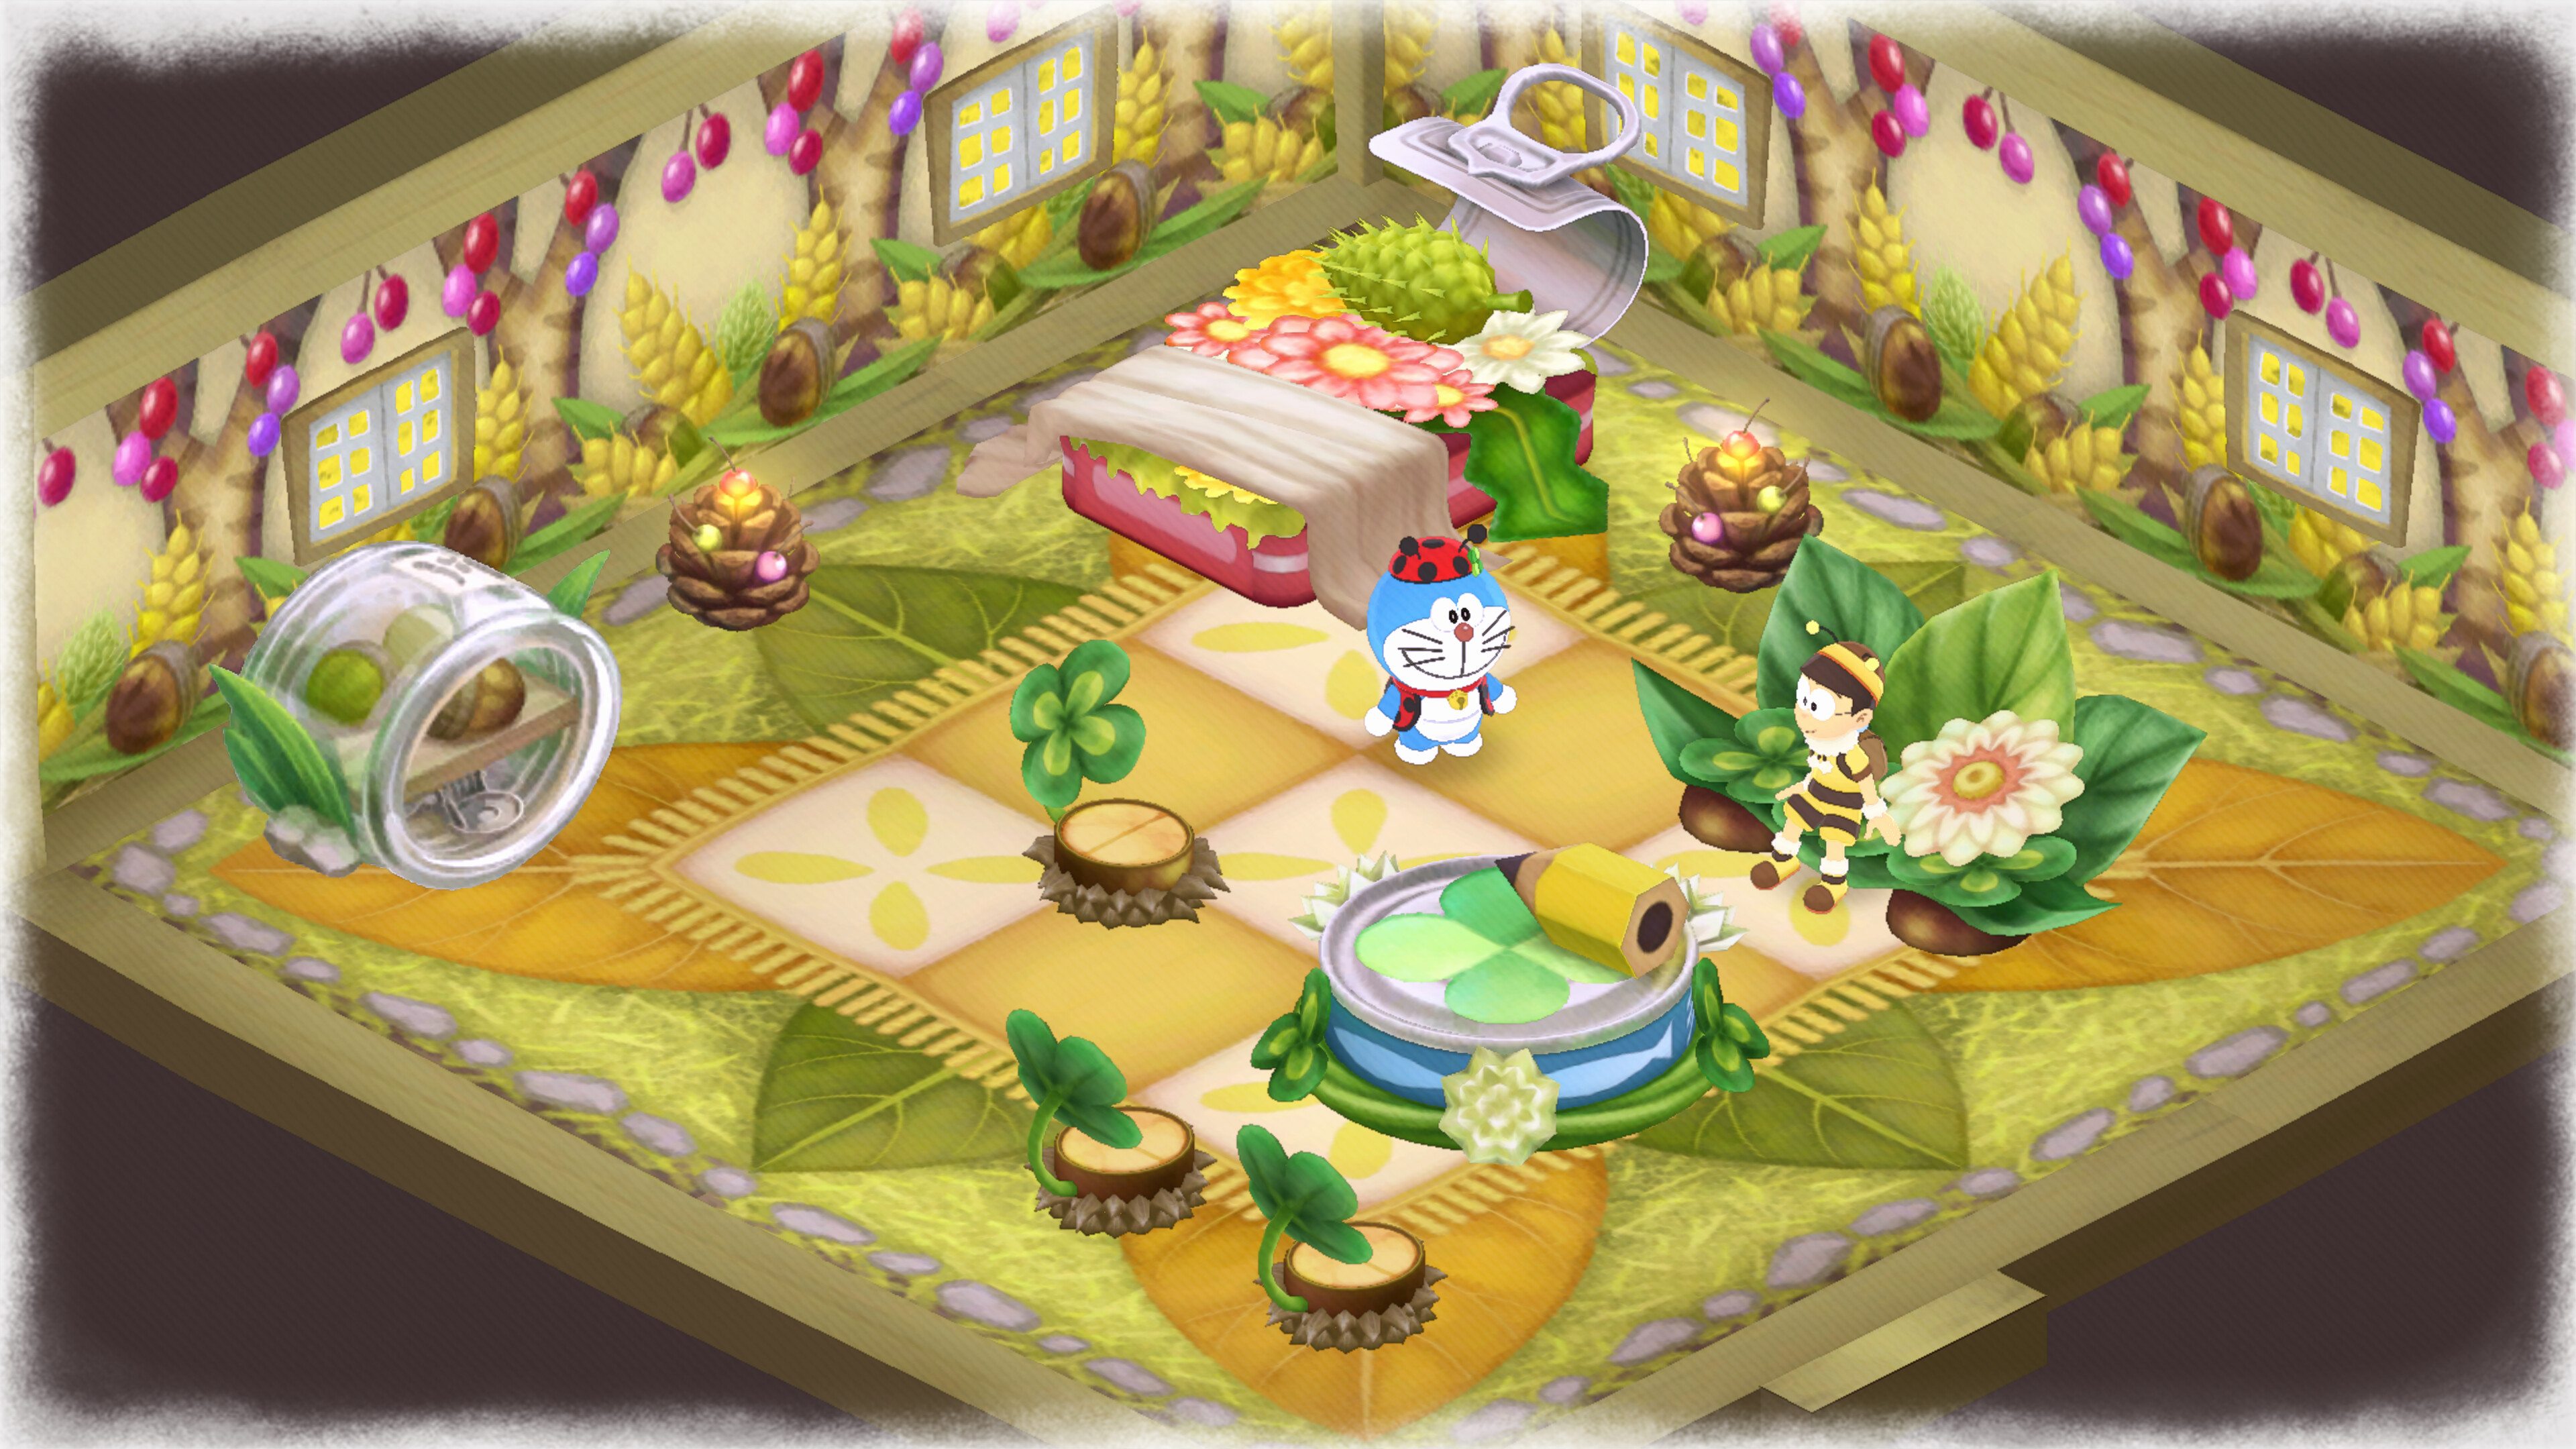 DORAEMON STORY OF SEASONS: Friends of the Great Kingdom - The Life of Insects Free Download for PC